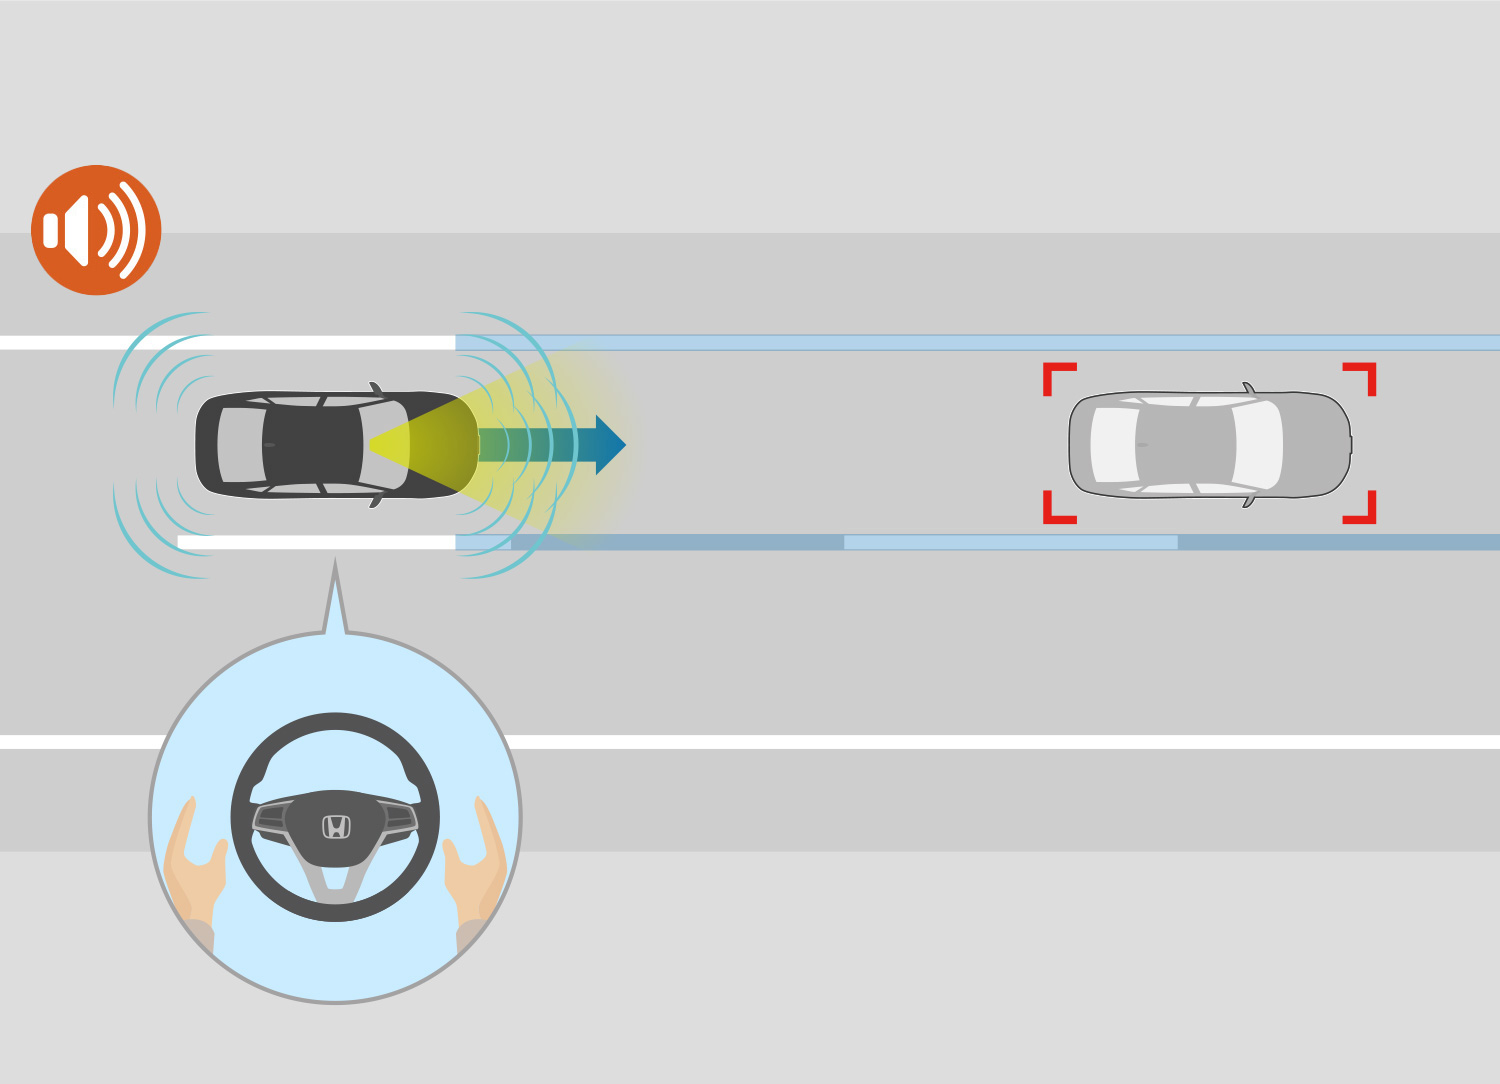 When the hands-off function becomes available, the system notifies the driver with audible and visual alerts. When there is no car in front of the vehicle, the system drives the vehicle along the middle of the lane while maintaining the pre-set vehicle speed. When there is a car in front, the system follows the car while maintaining a proper following speed.